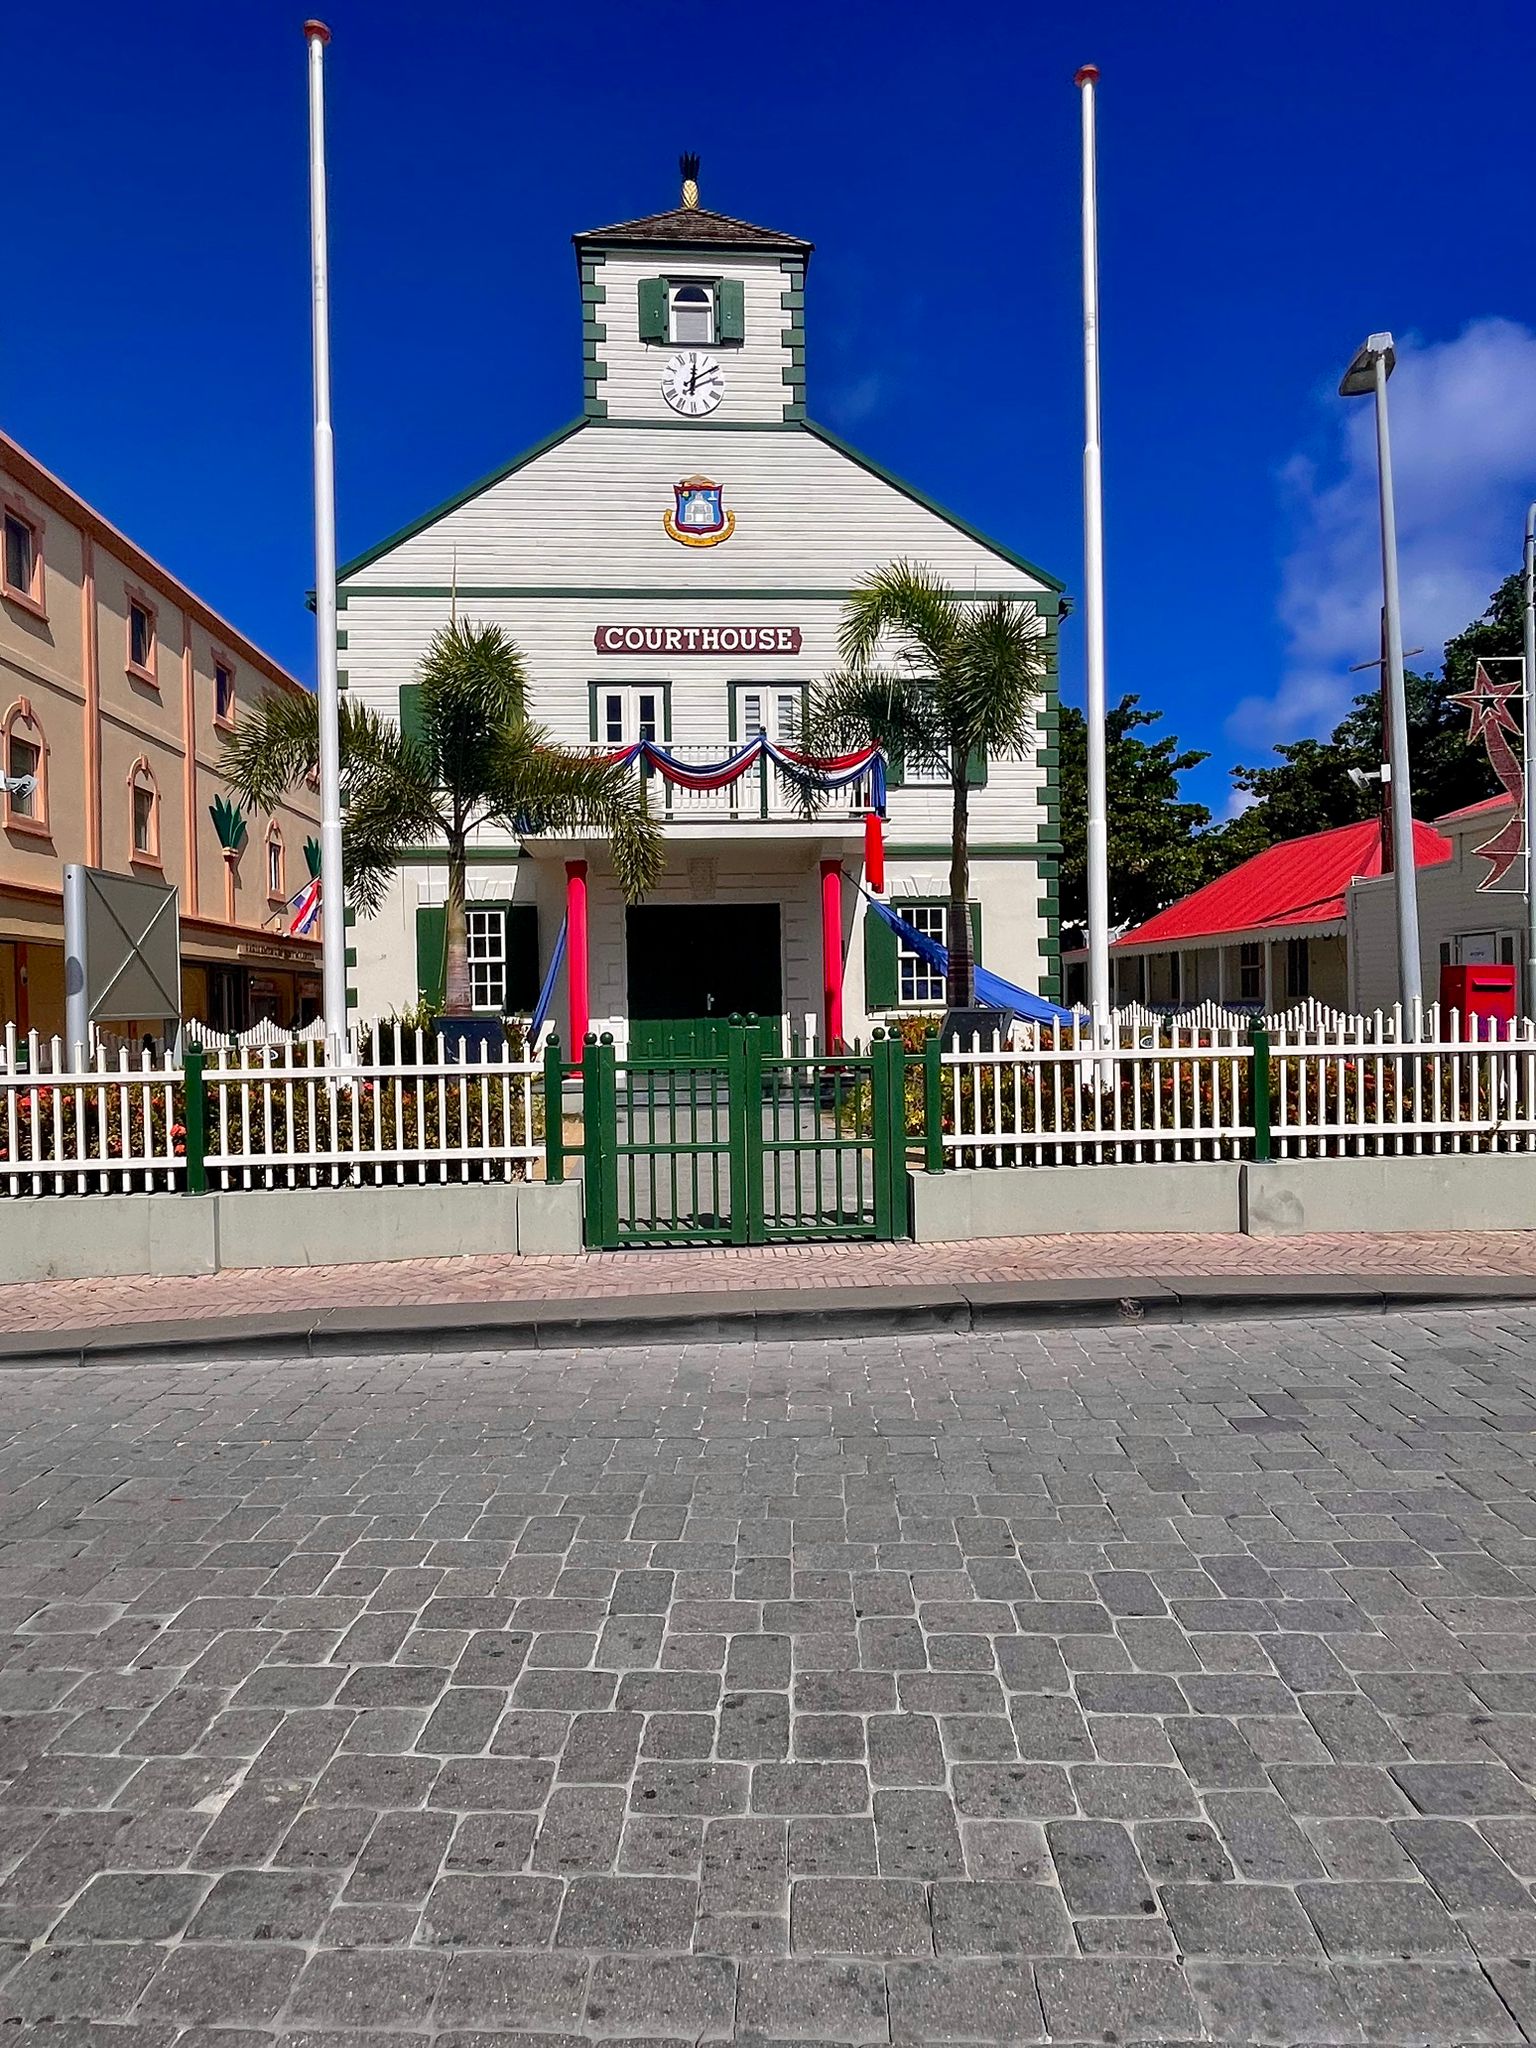 The Courthouse in Philipsburg St. Maarten